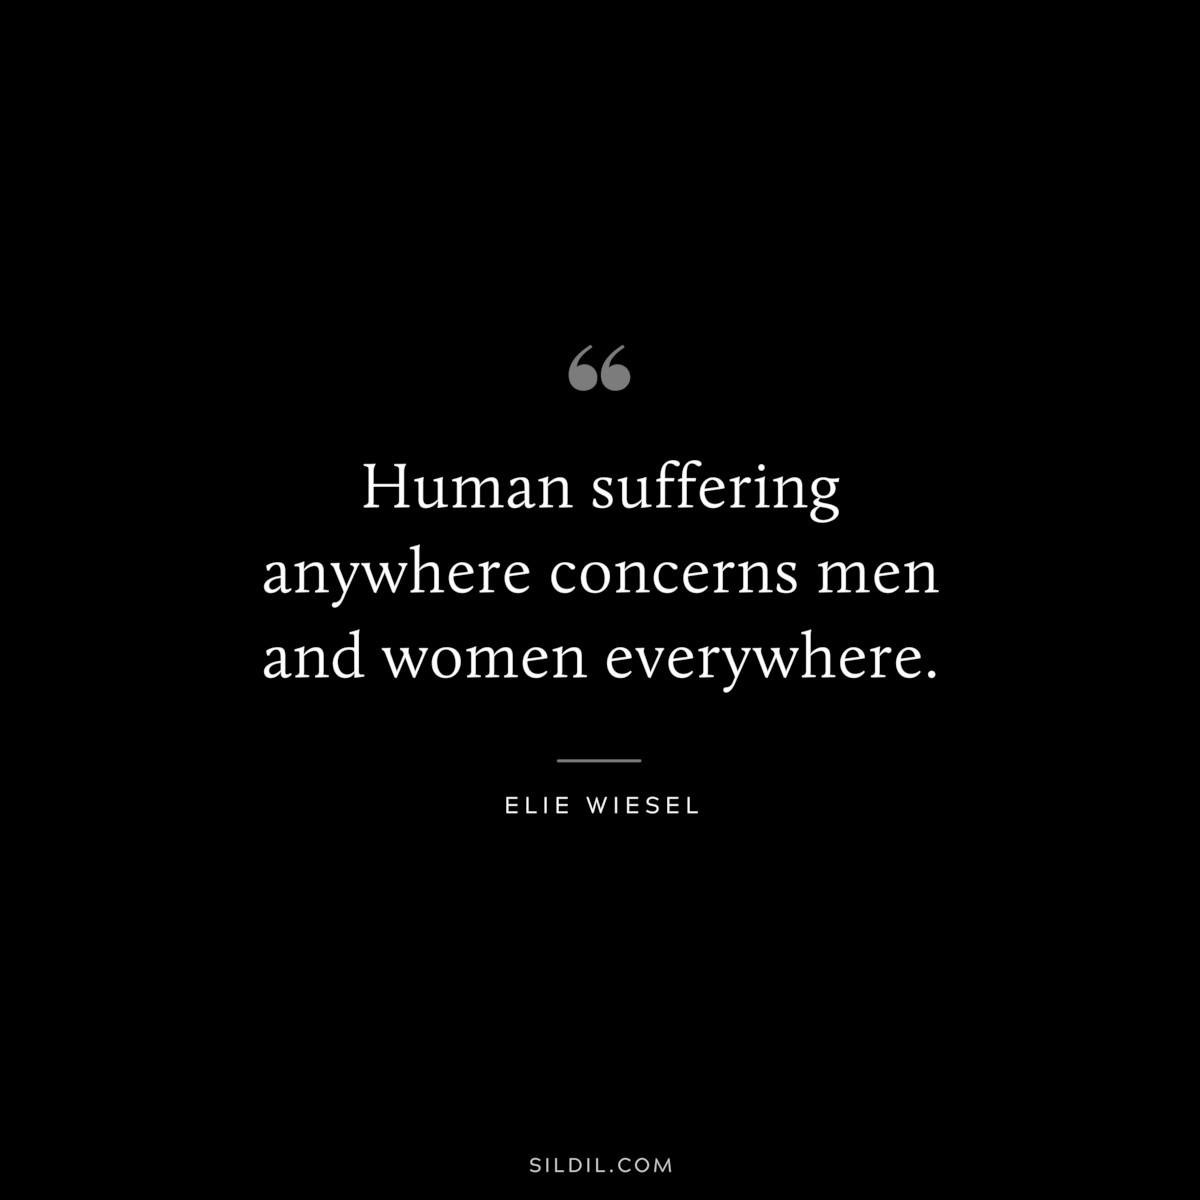 Human suffering anywhere concerns men and women everywhere. ― Elie Wiesel